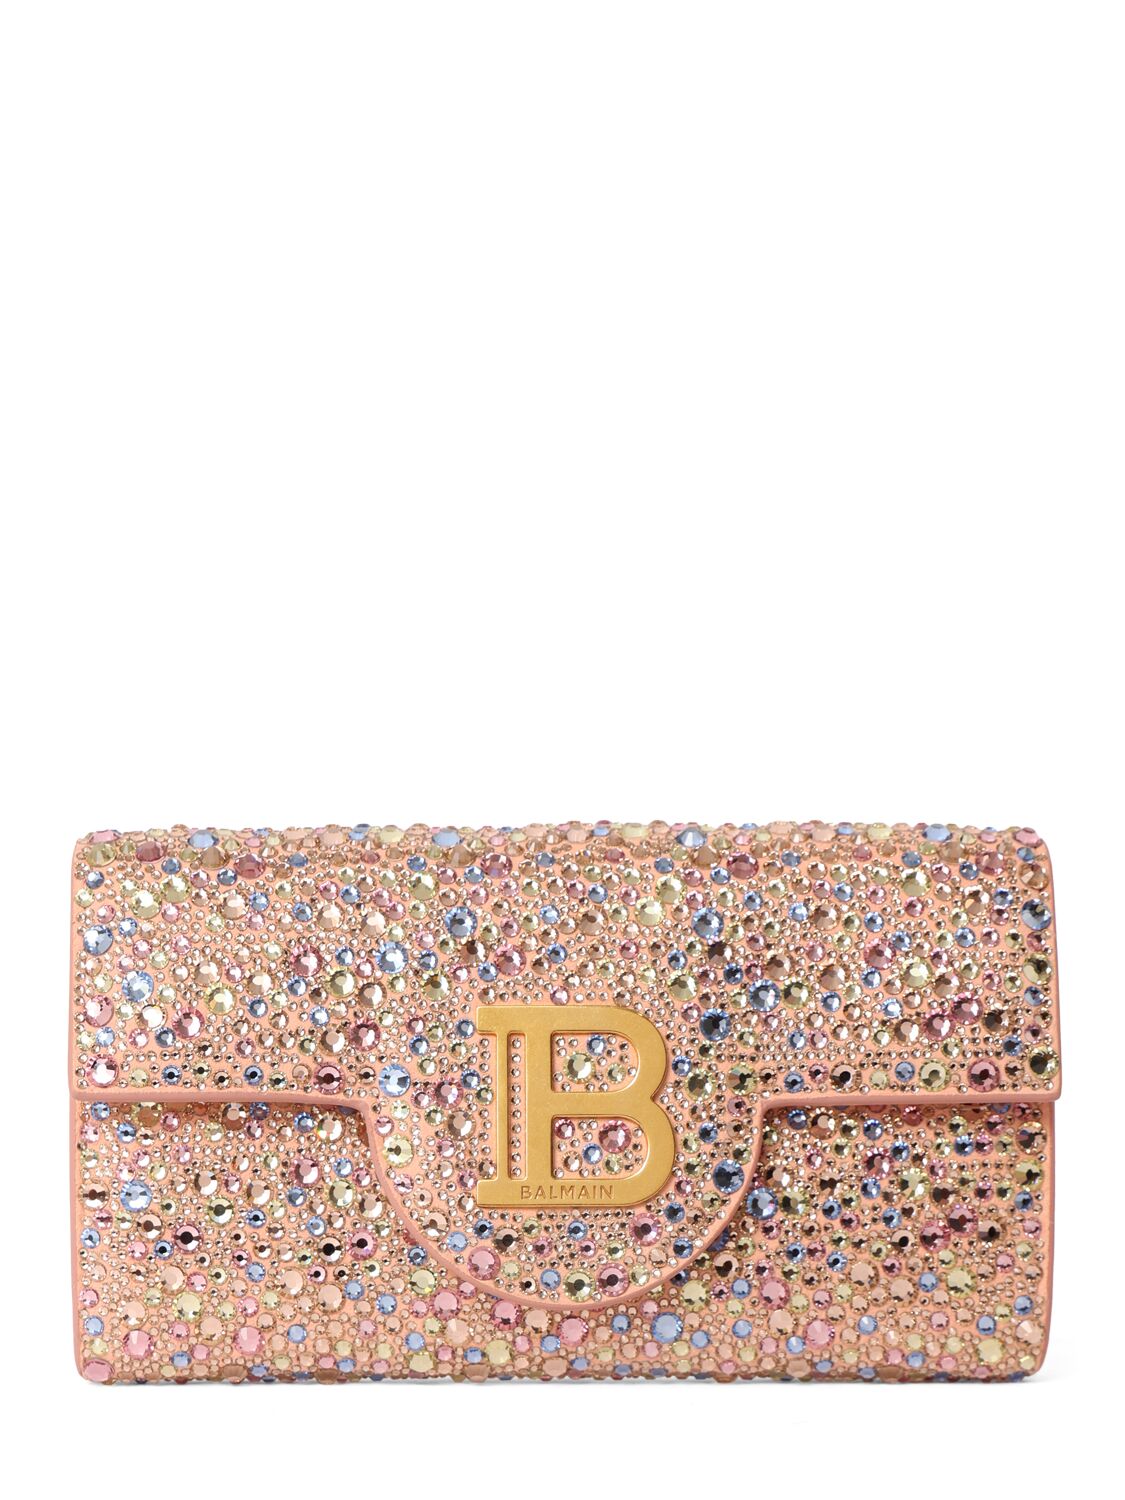 Balmain B-buzz Suede Leather & Crystal Clutch In Blue Pale,rose